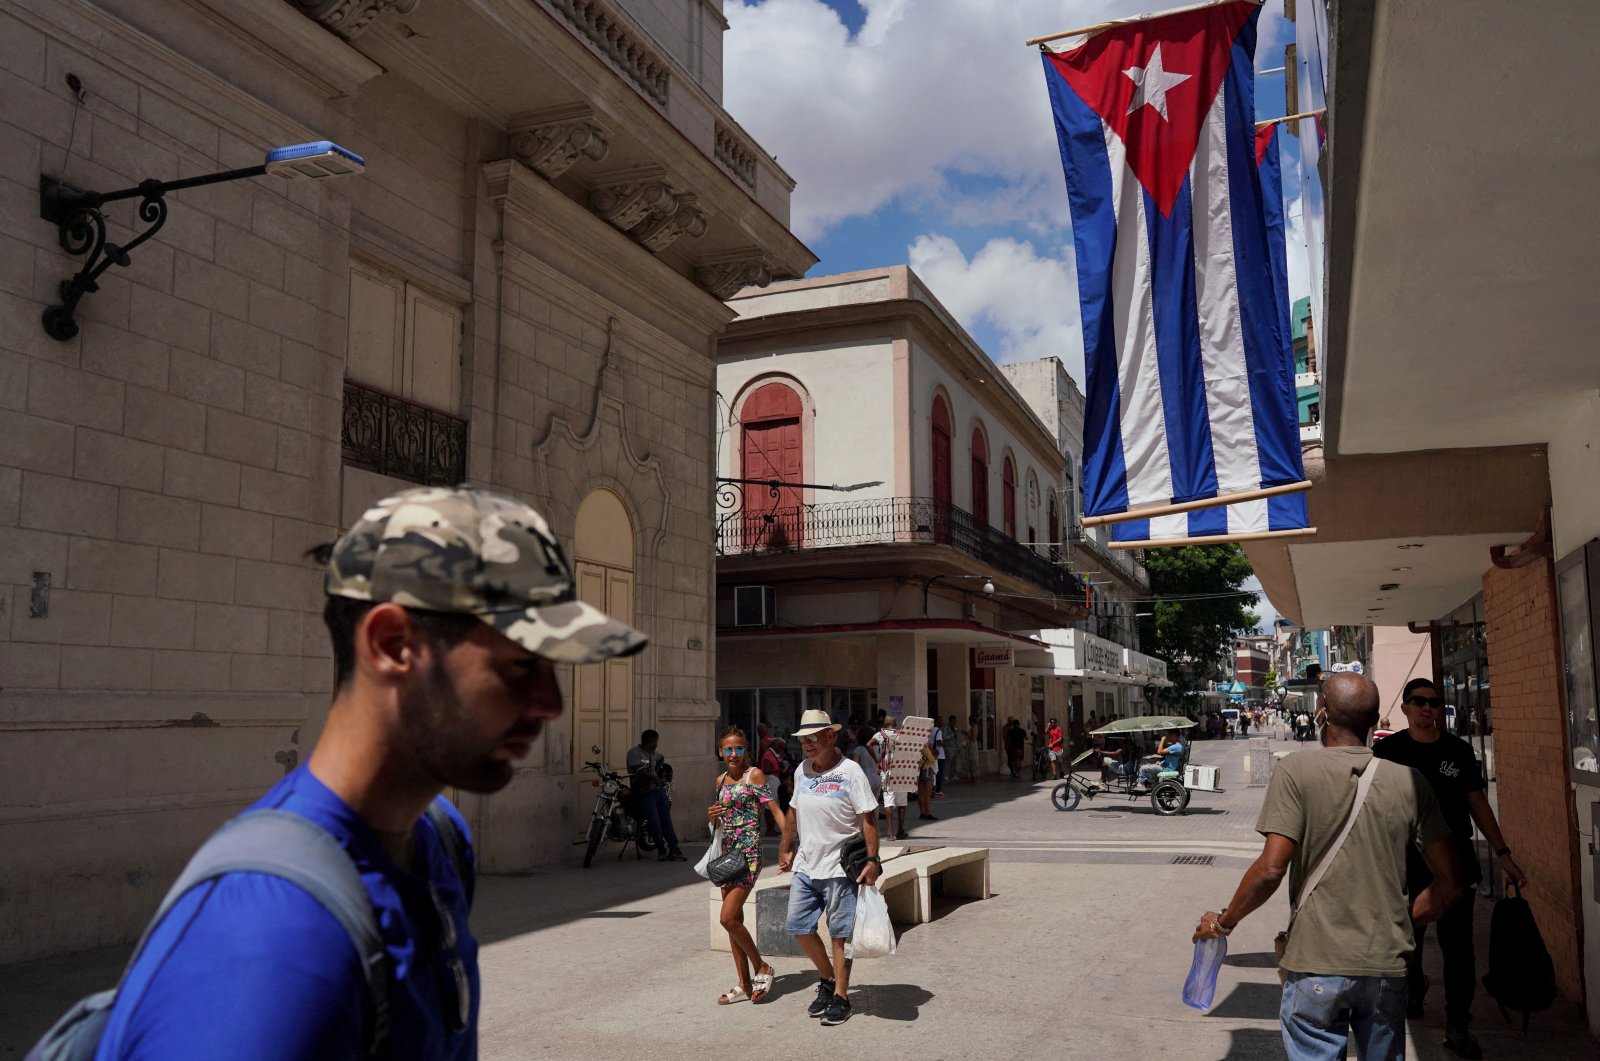 Cuban flags are displayed at a commercial road in downtown Havana, Cuba, July 20, 2022. (Reuters Photo)